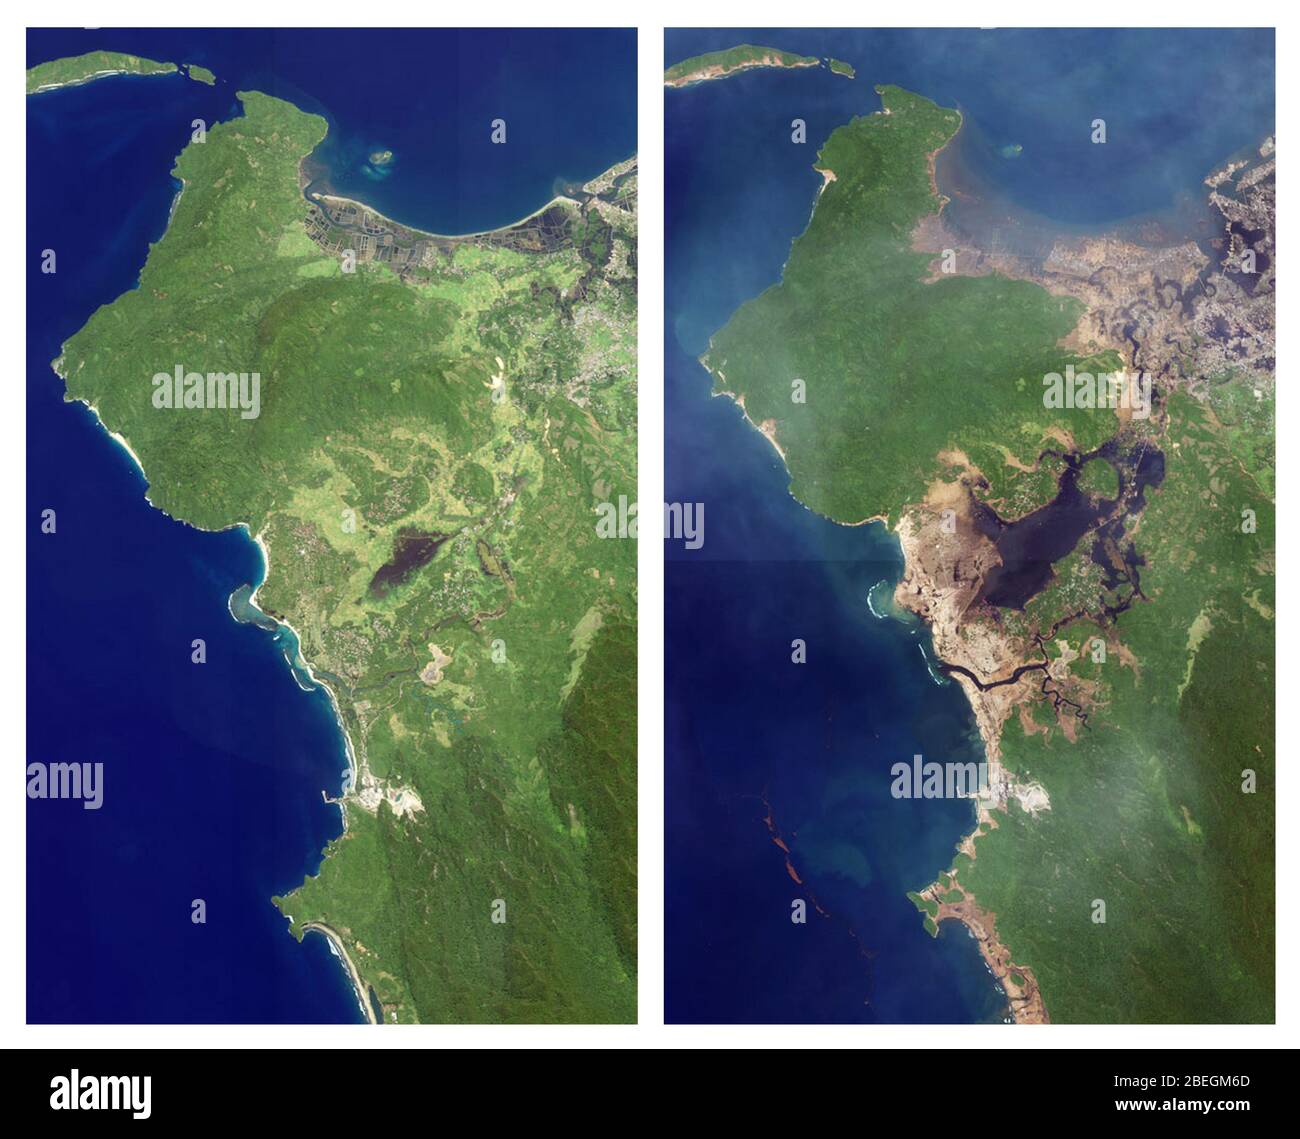 Aceh, Indonesia, Before and After 2004 Tsunami Stock Photo